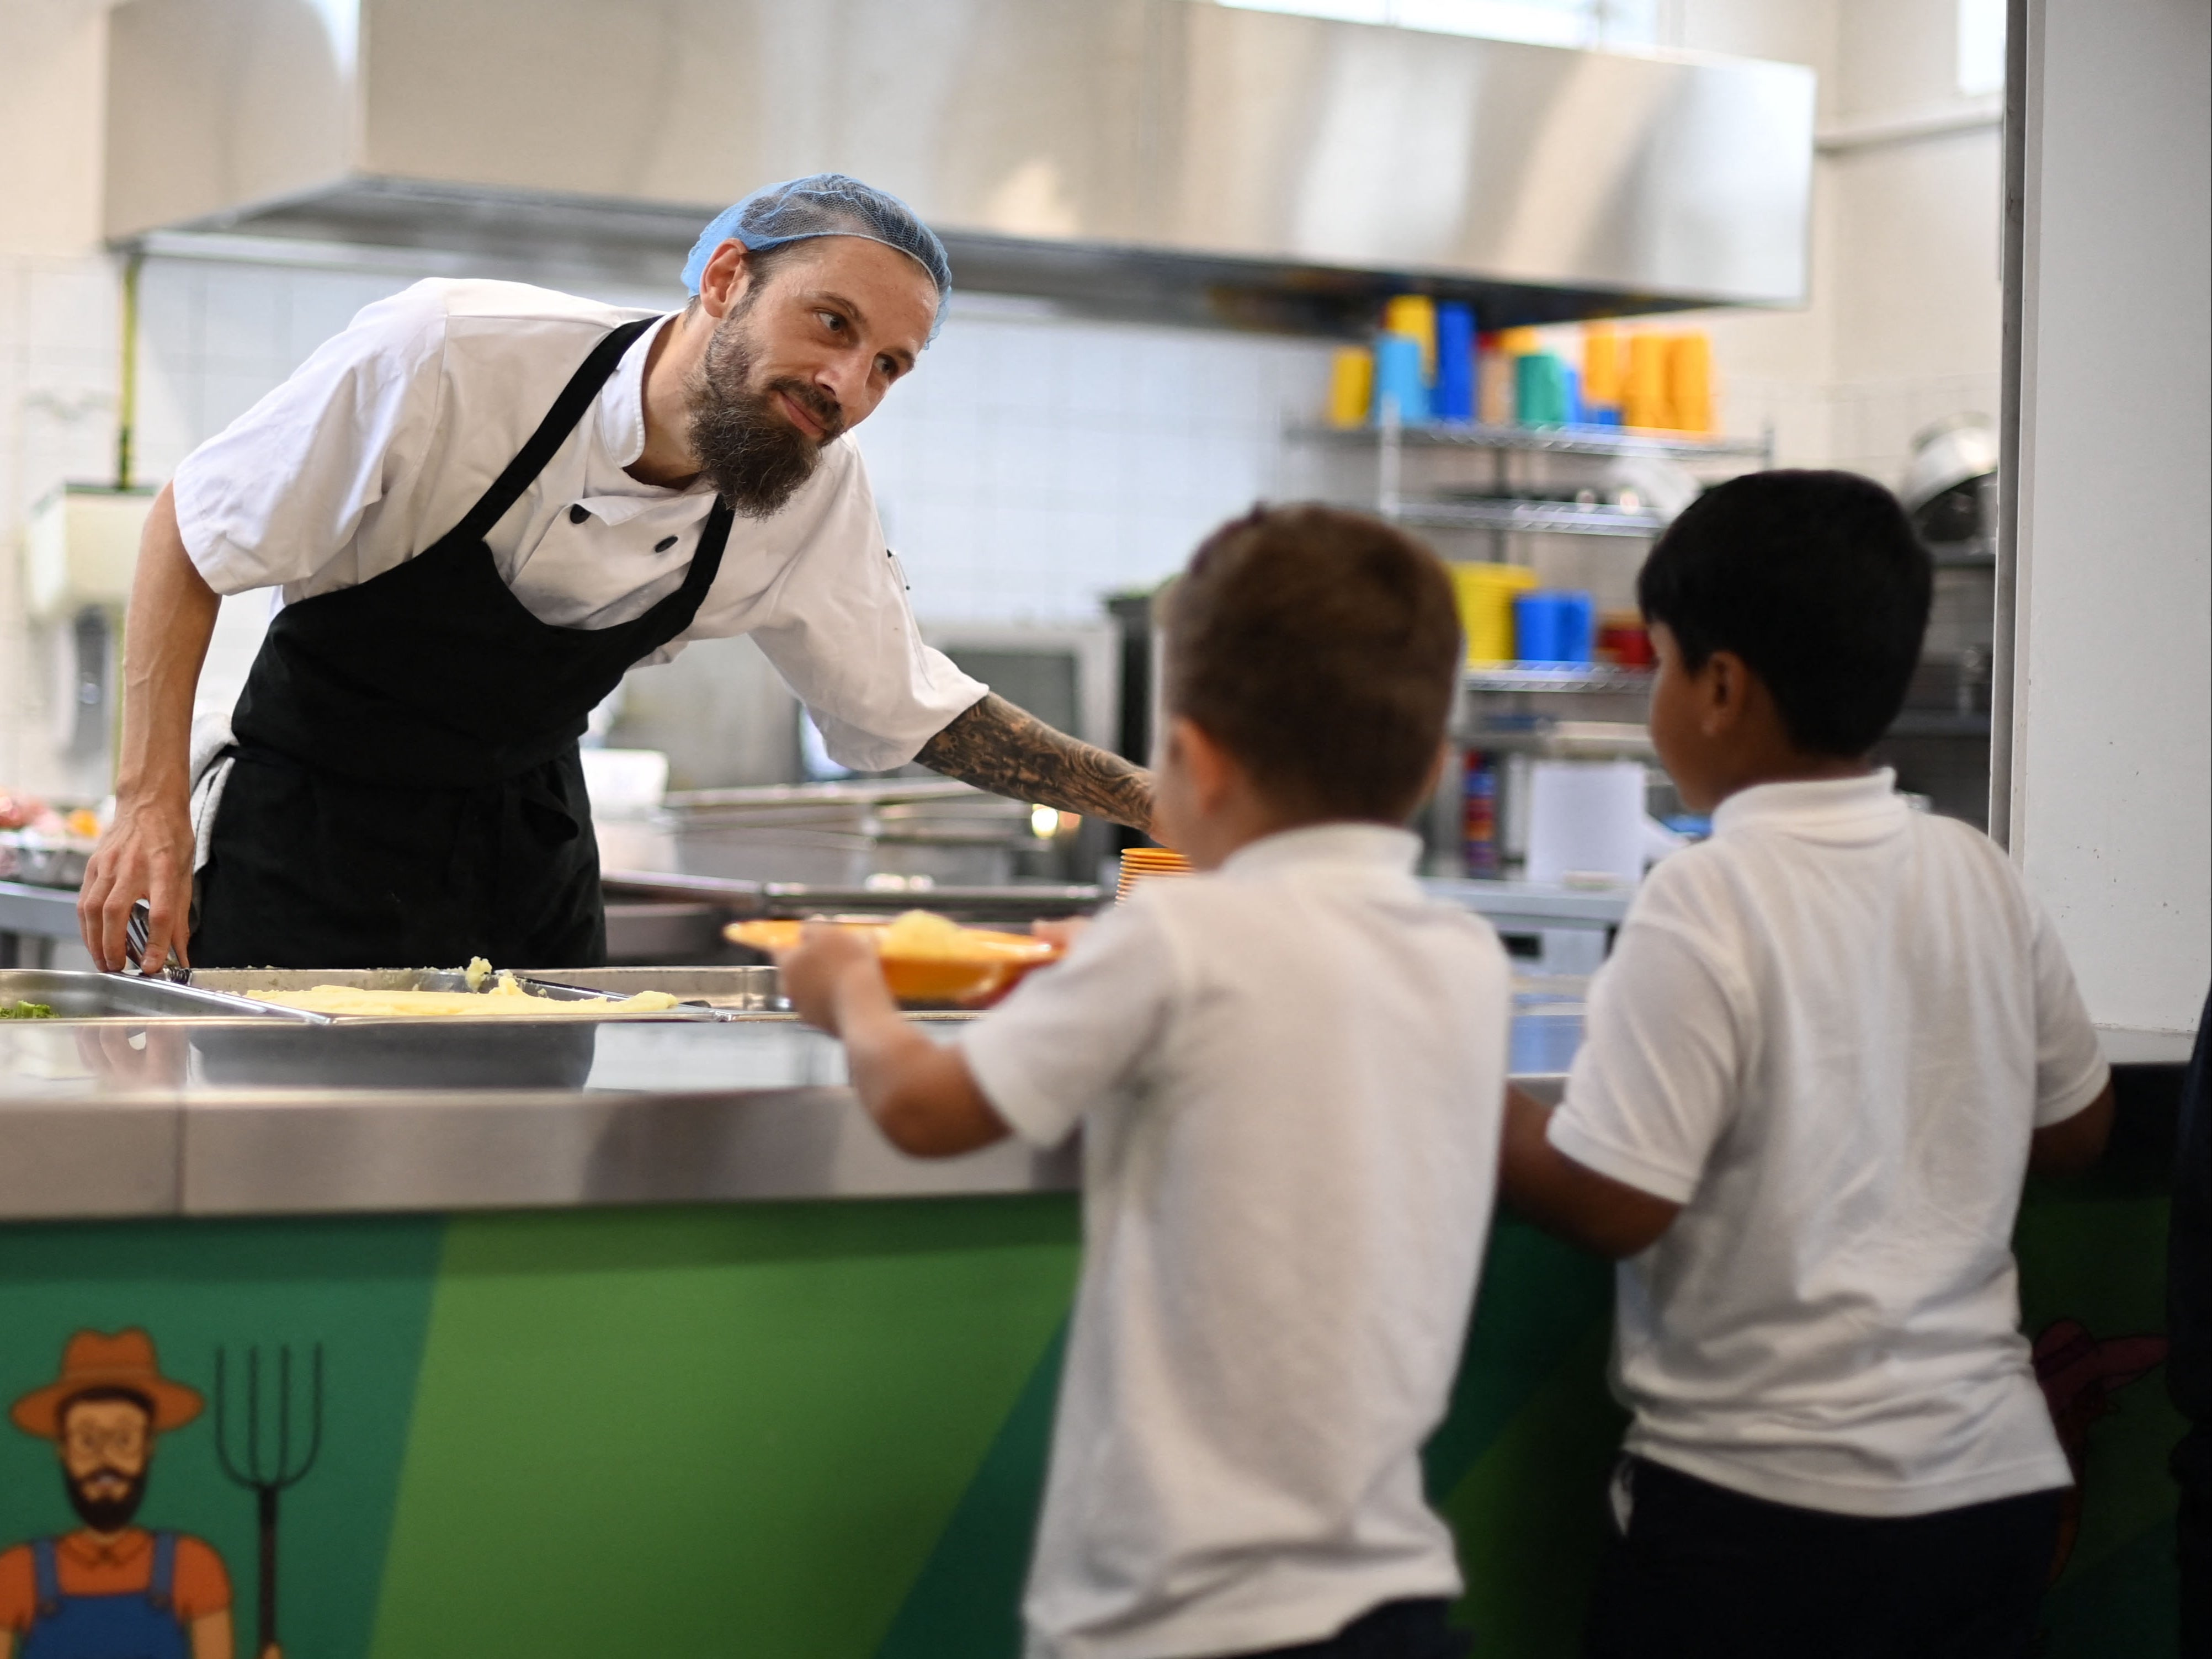 A school chef serves cooked hot dinner to students on their lunch break at St Luke’s Church of England Primary School in east London